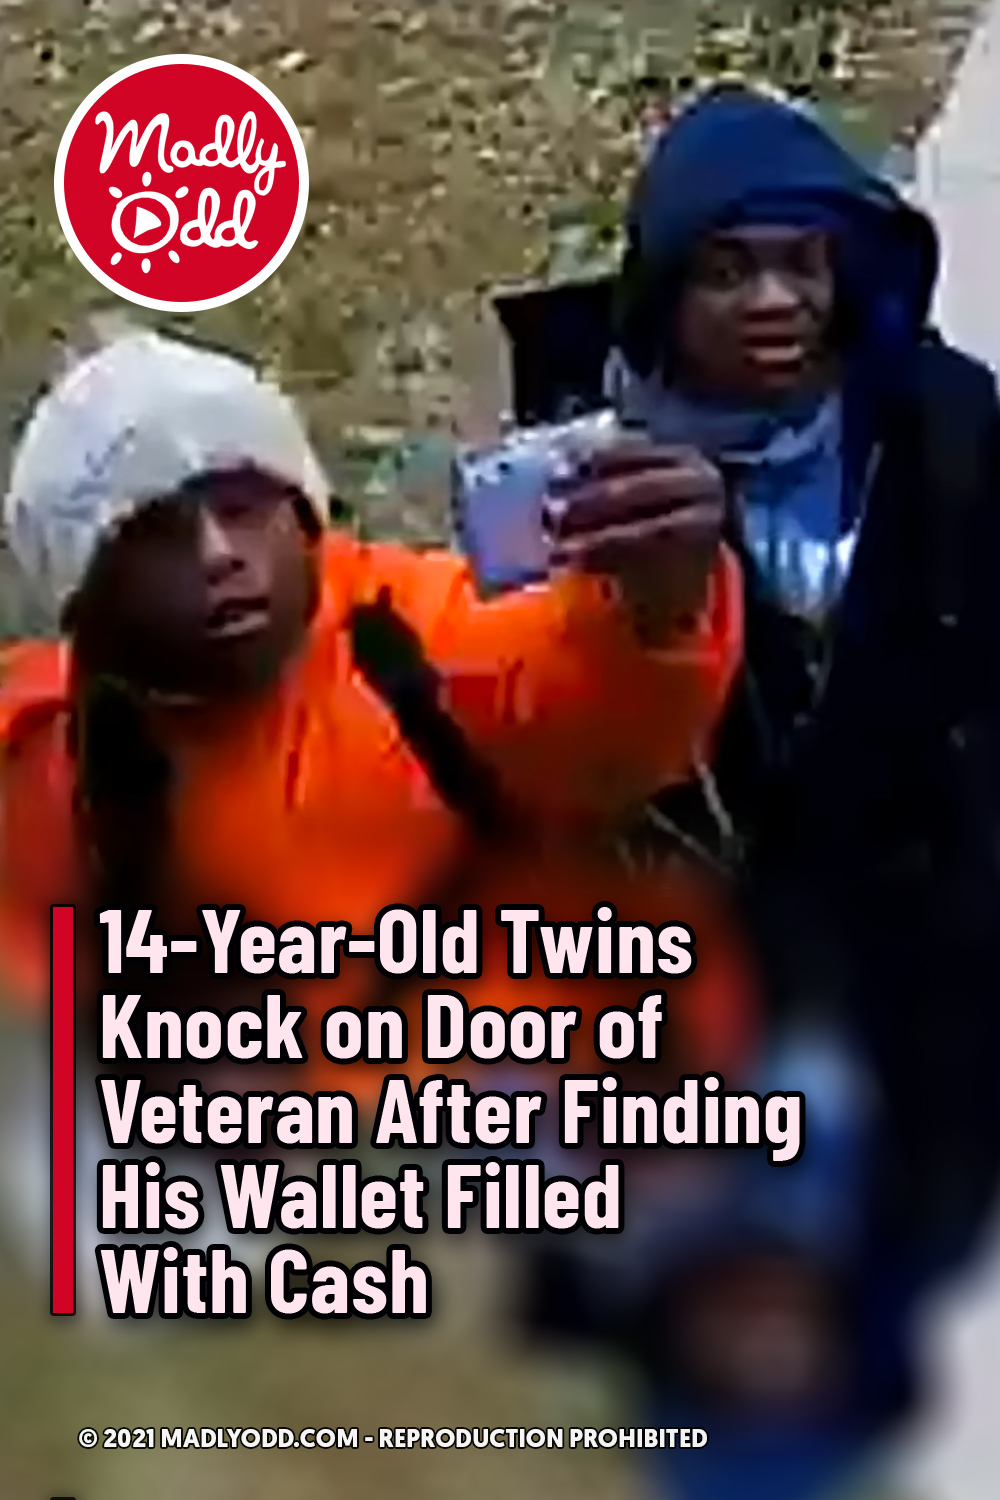 14-Year-Old Twins Knock on Door of Veteran After Finding His Wallet Filled With Cash